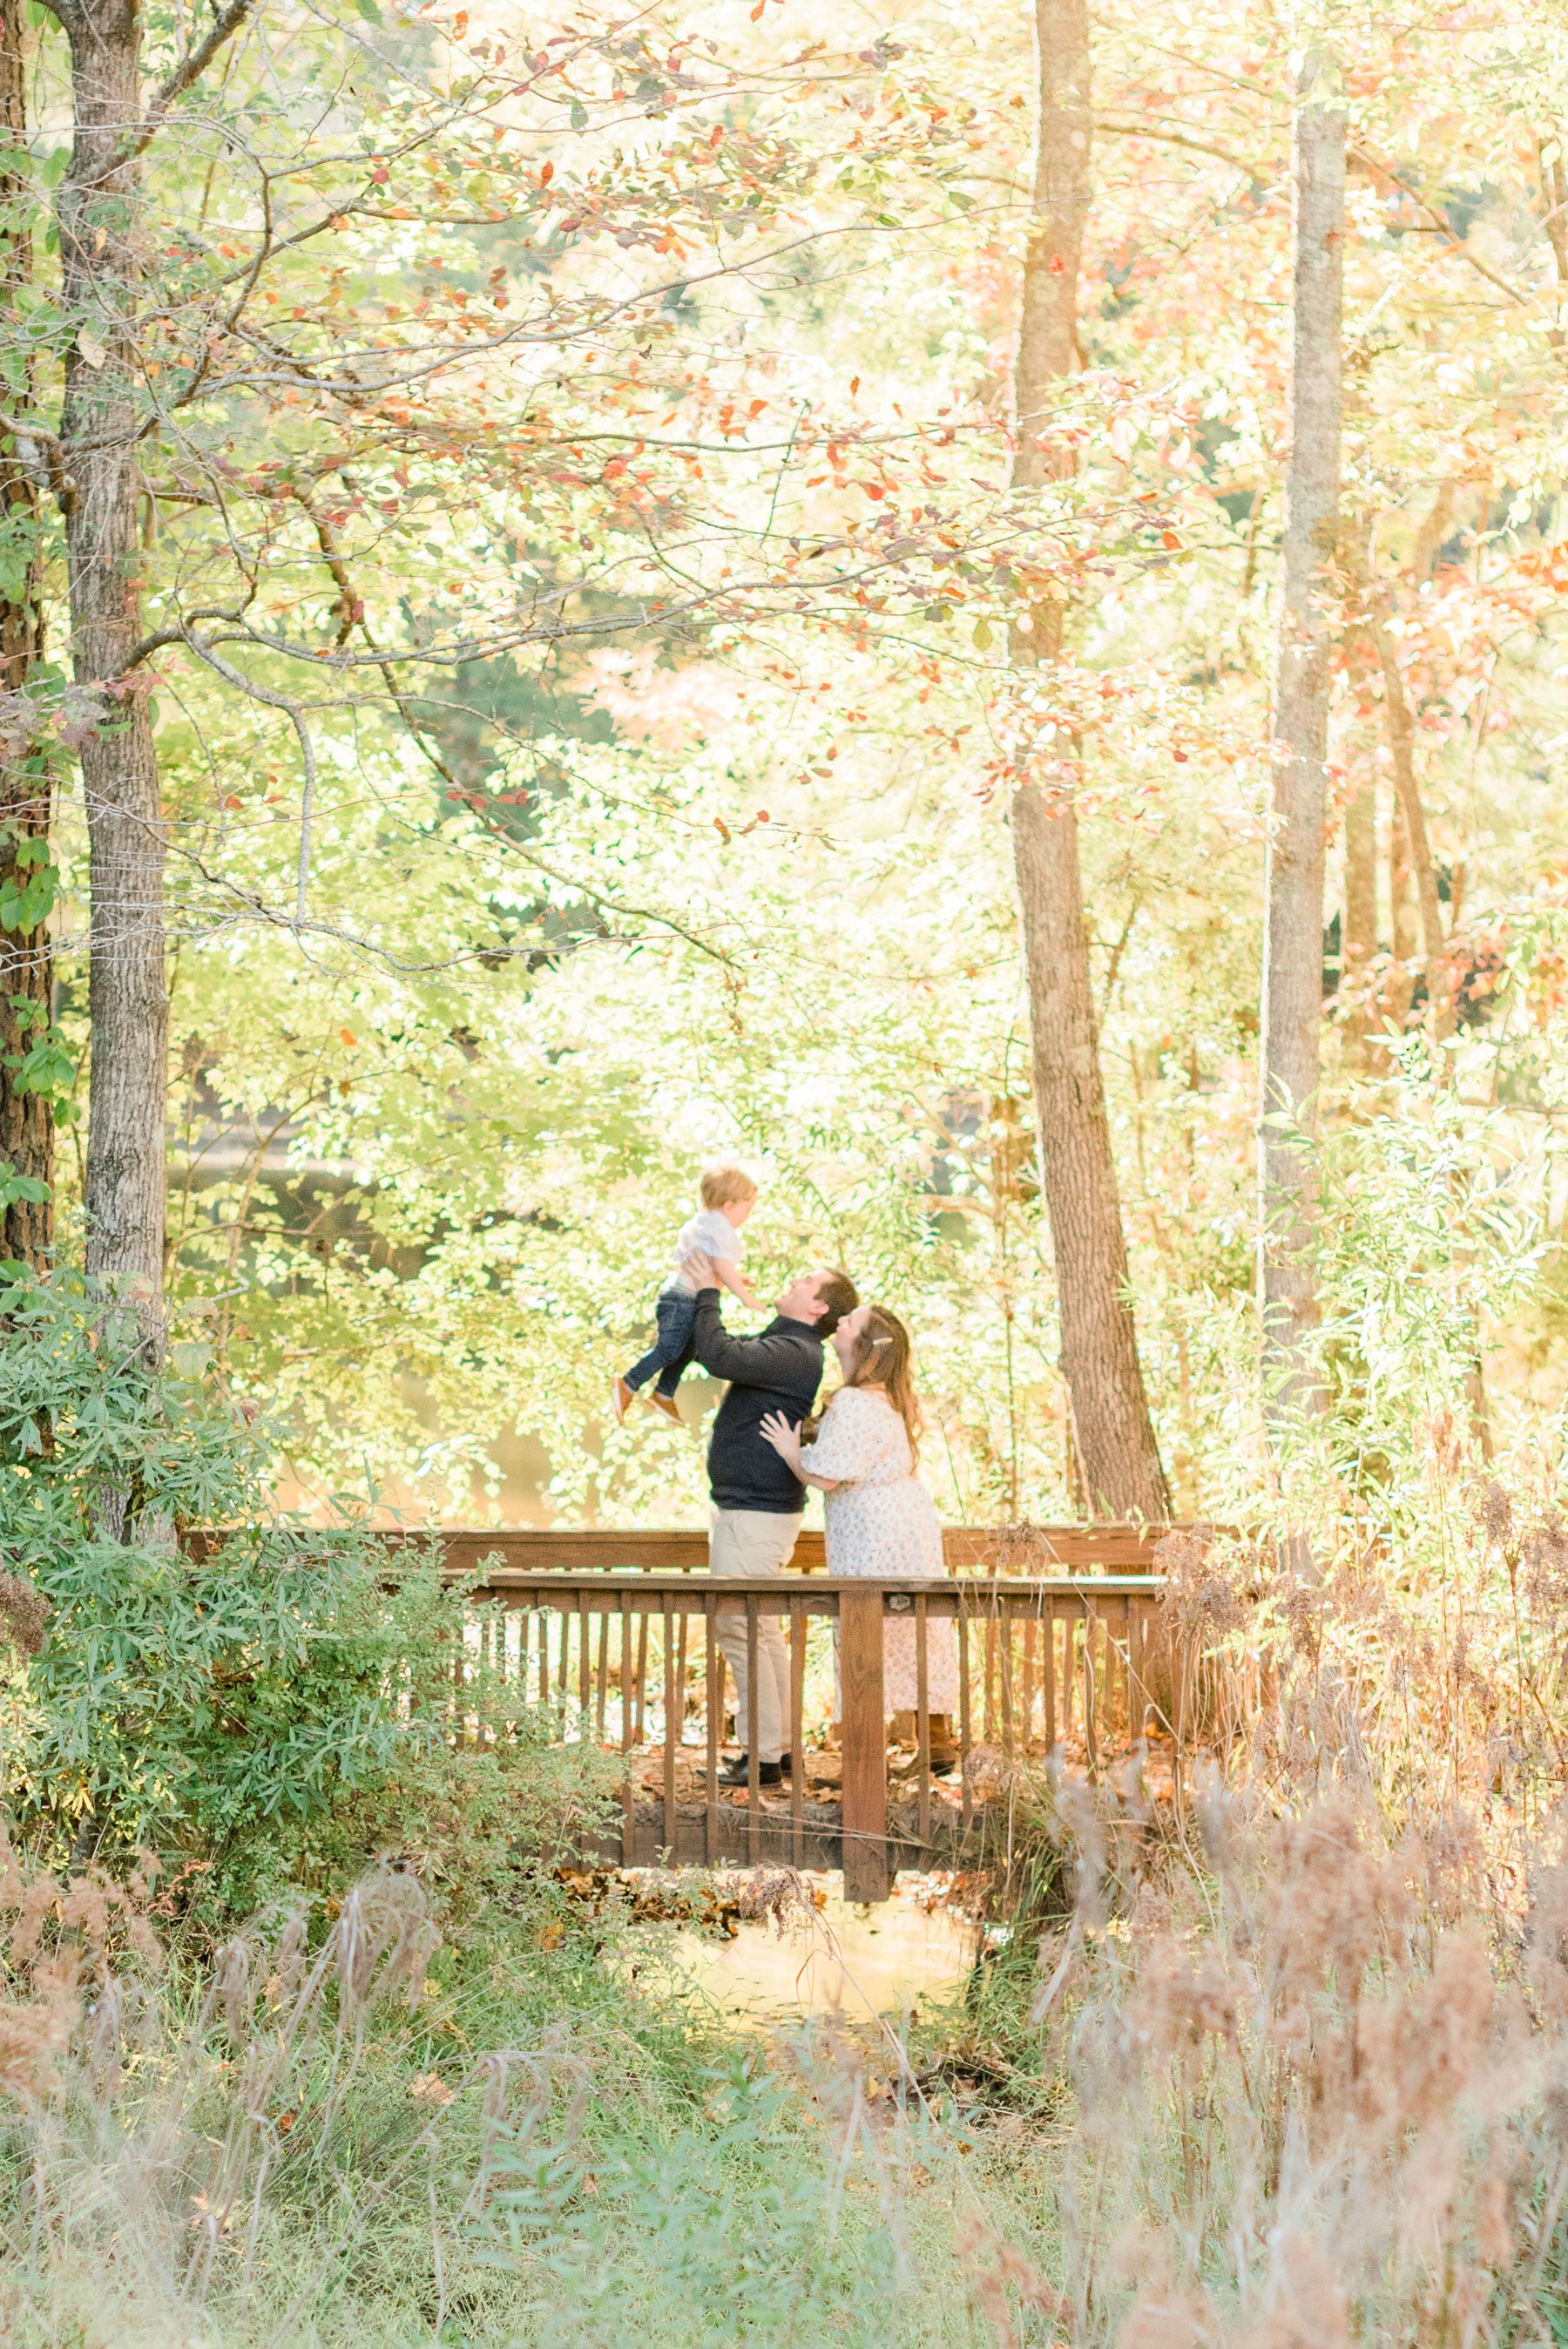  Jacquie Erickson photographs this family of three from a distance to include the beautiful Georgian outdoors. Family of three little boy mama’s boy Altlanta, Georgia Peachtree City Fayetteville Senoia&nbsp; #jacquieericksonphotography #atlantaphotog